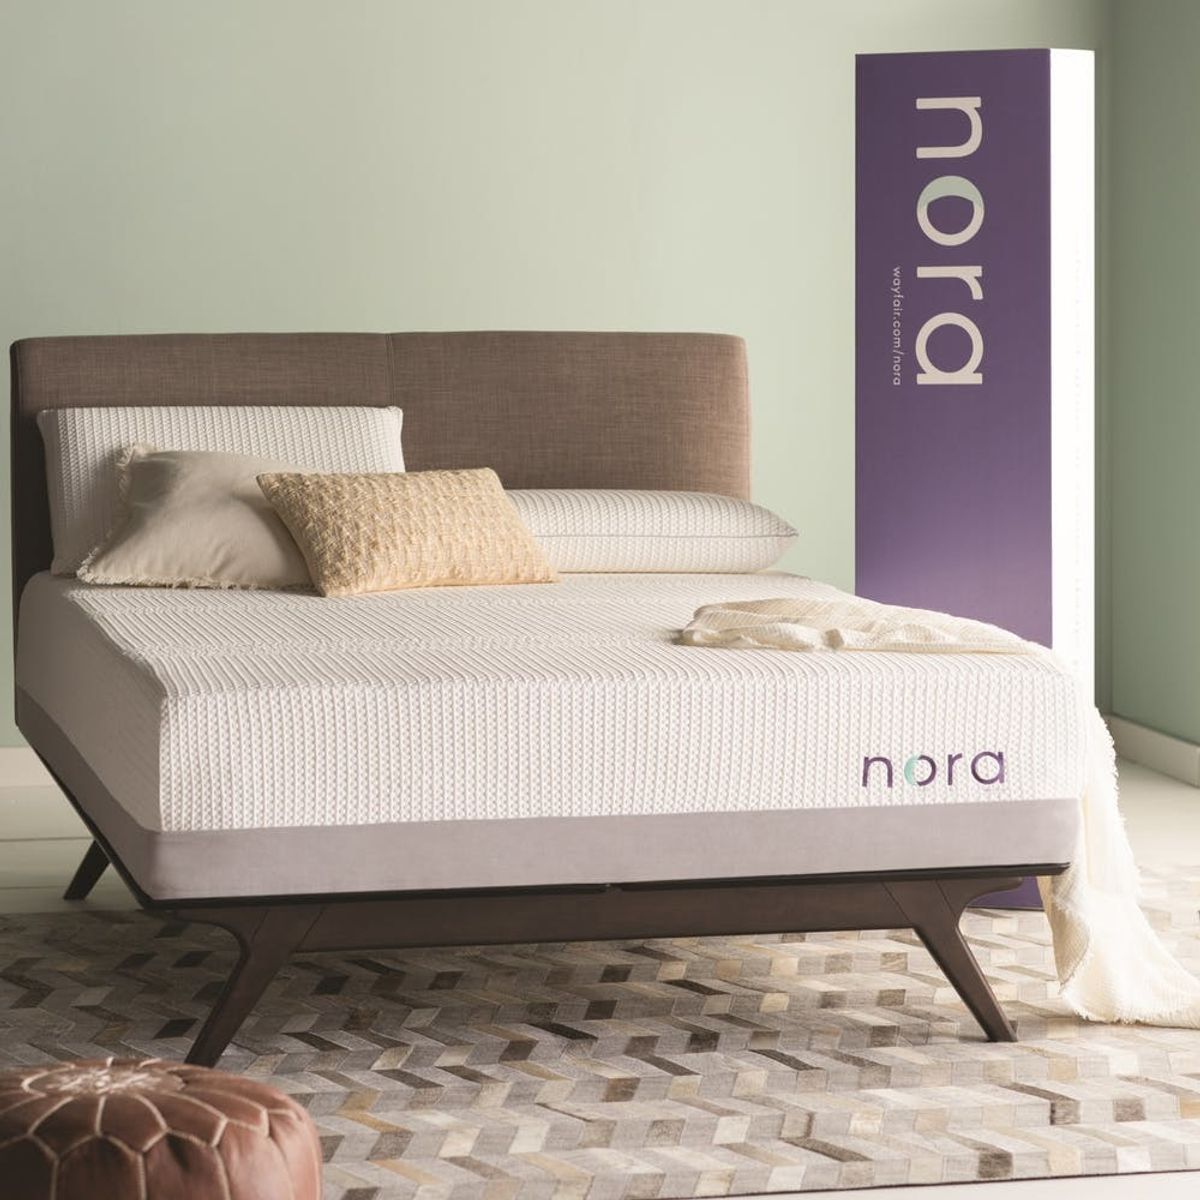 Here’s How to Pick the Best Mattress for Your Zodiac Sign